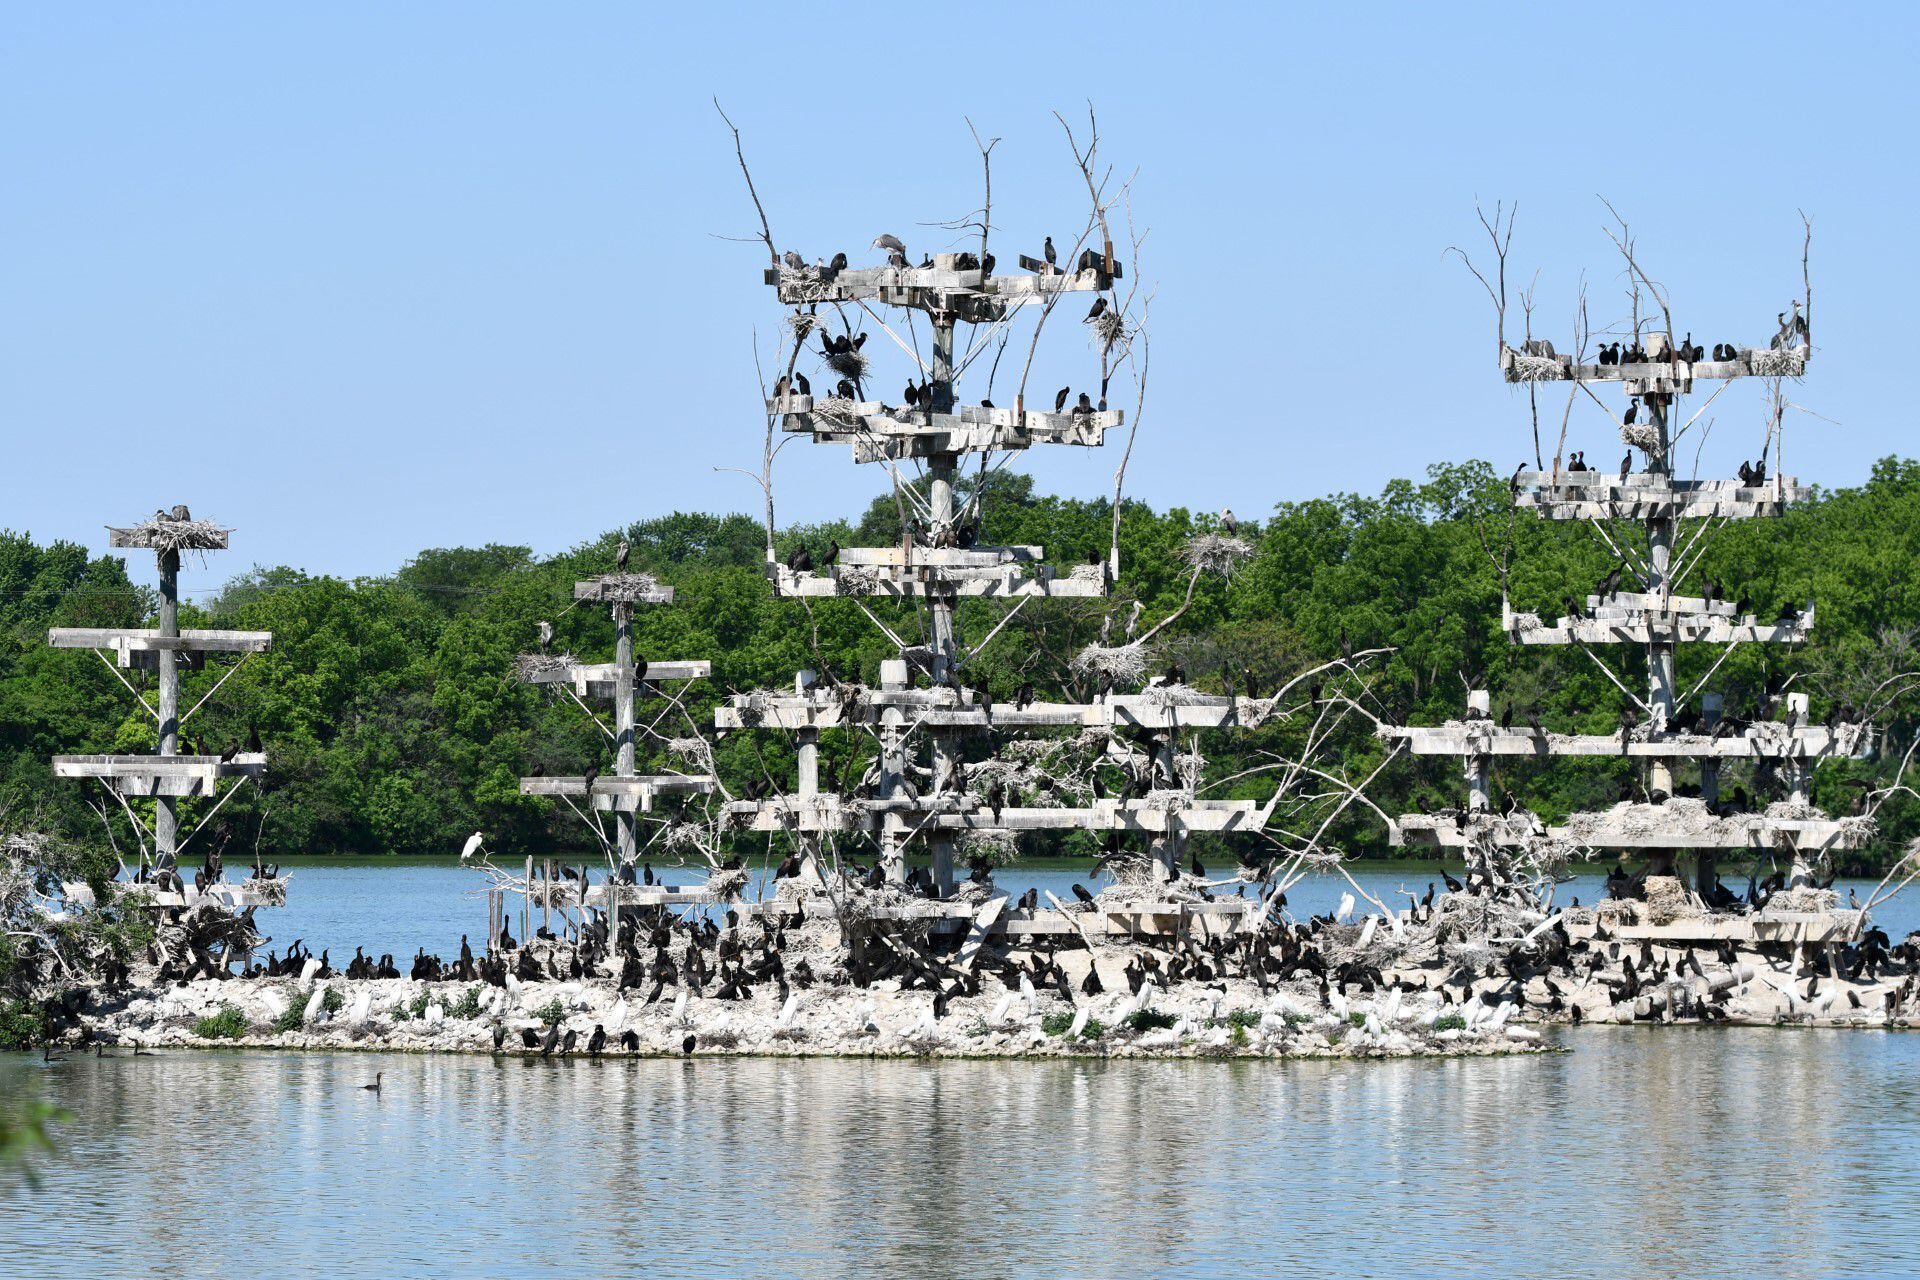 View nesting birds during a Lake Renwick Migratory Bird Viewing program on Saturday, July 8, 2023 at the Forest Preserve District of Will County’s Lake Renwick Heron Rookery Nature Preserve in Plainfield.